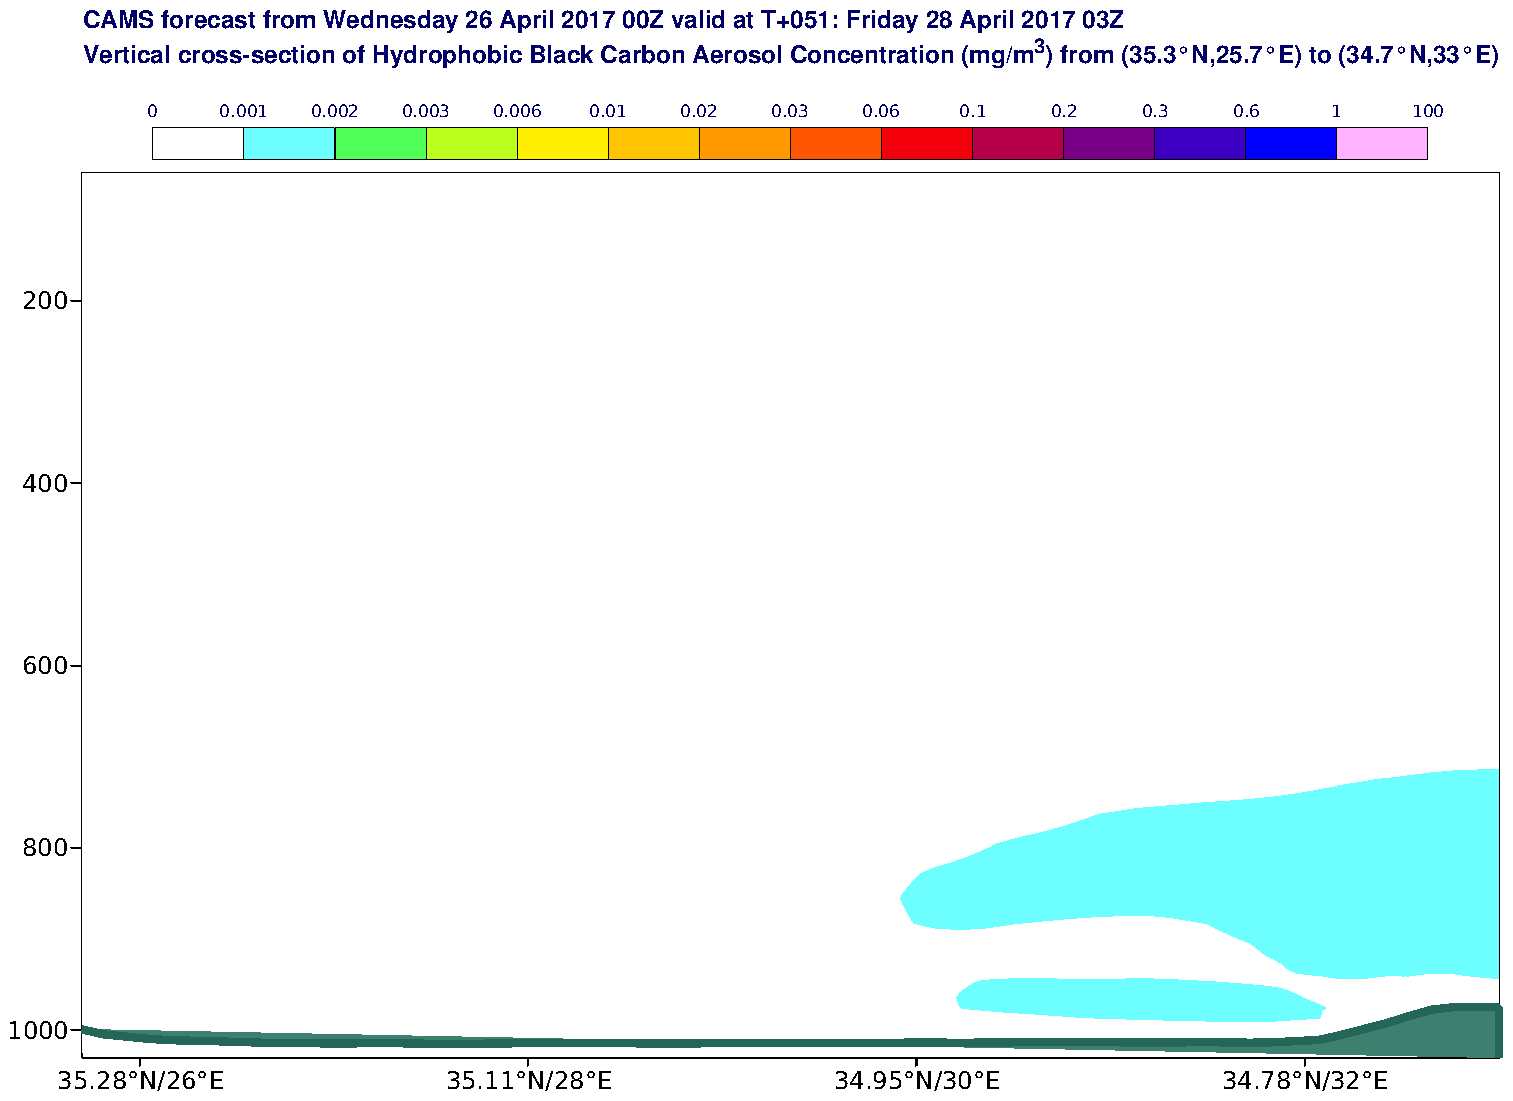 Vertical cross-section of Hydrophobic Black Carbon Aerosol Concentration (mg/m3) valid at T51 - 2017-04-28 03:00